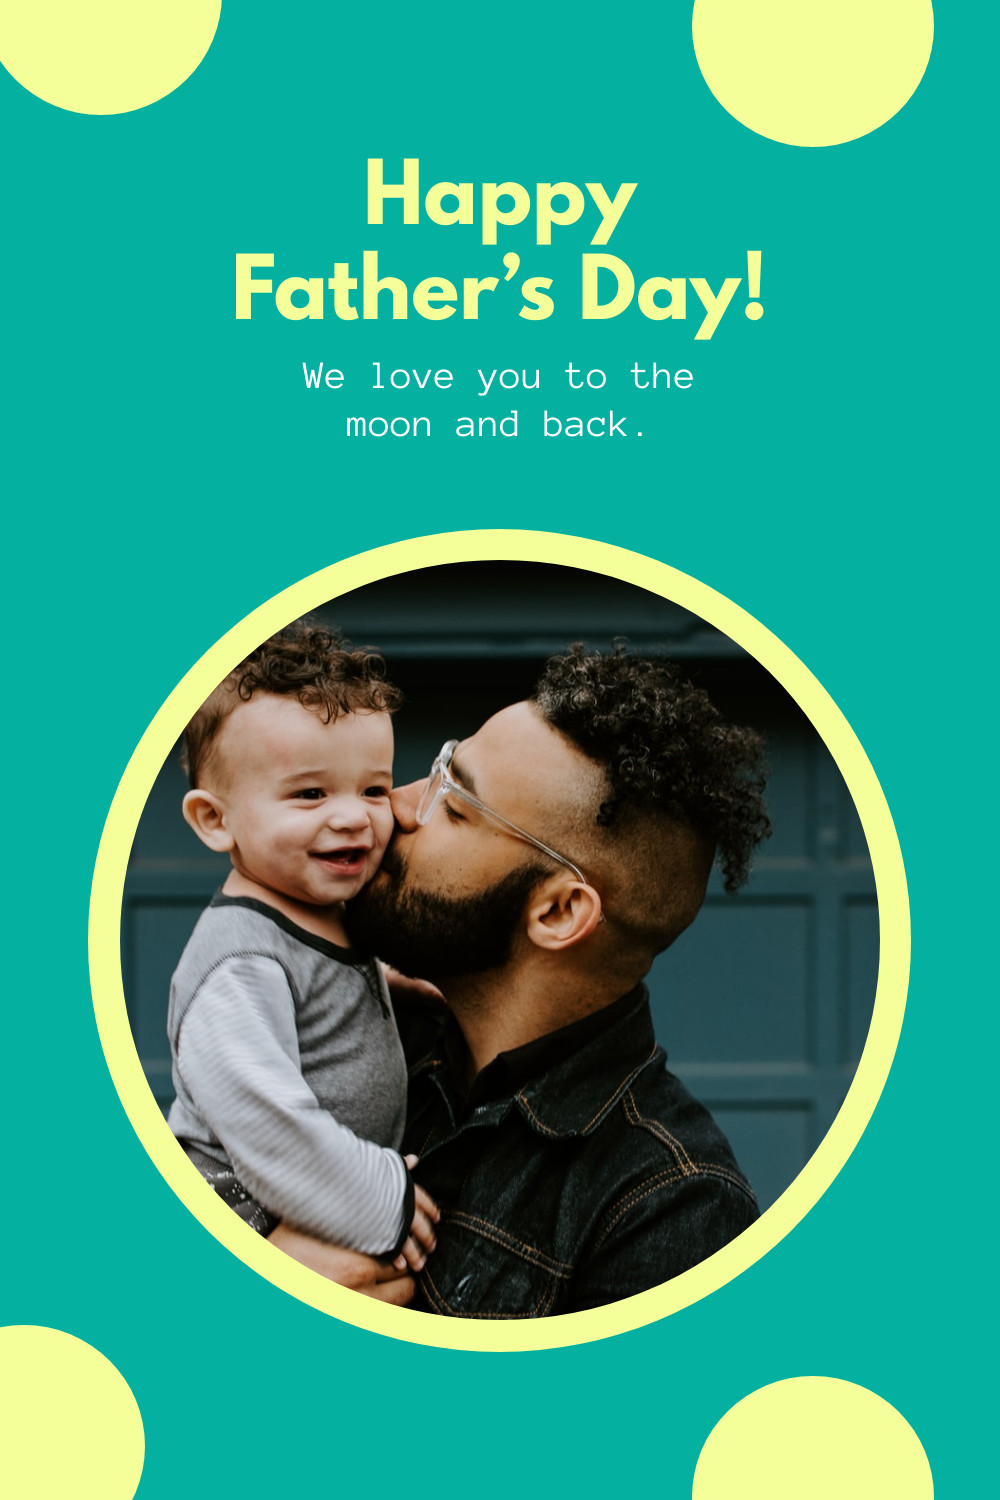 Father's Day Love You to the Moon and Back Facebook Cover 820x360